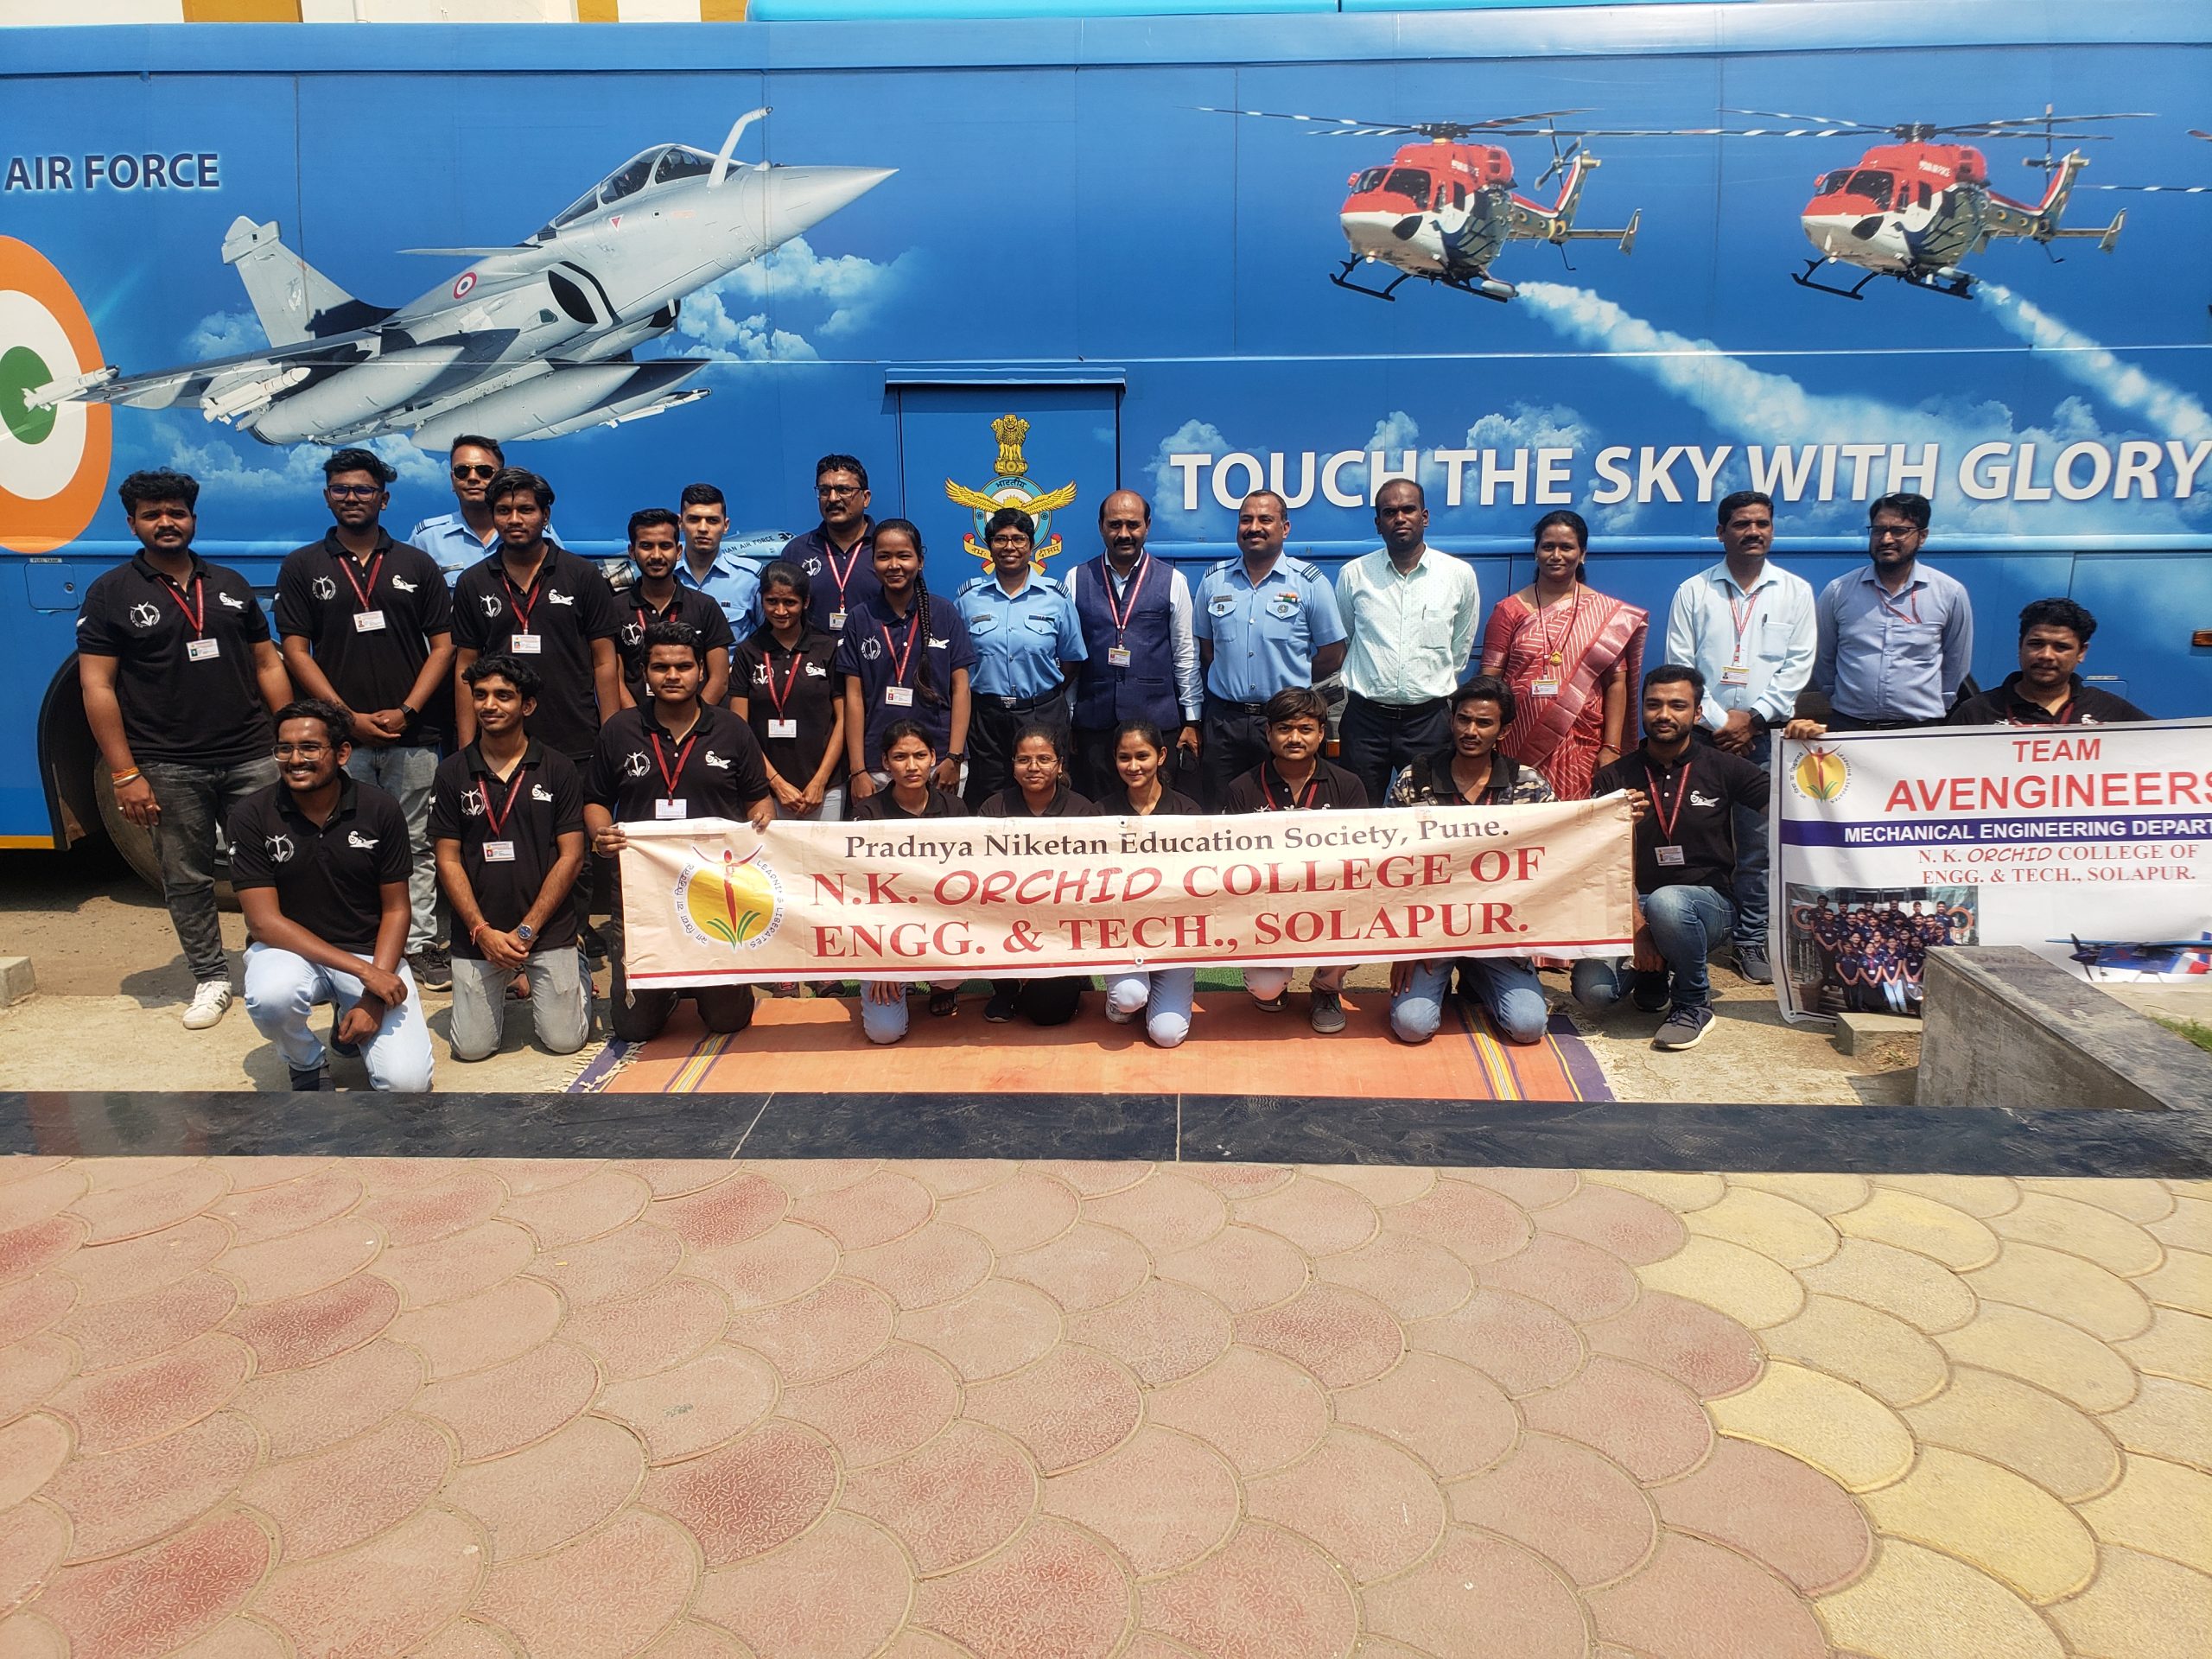 Team Avengineers Session by Indian Airforce scaled